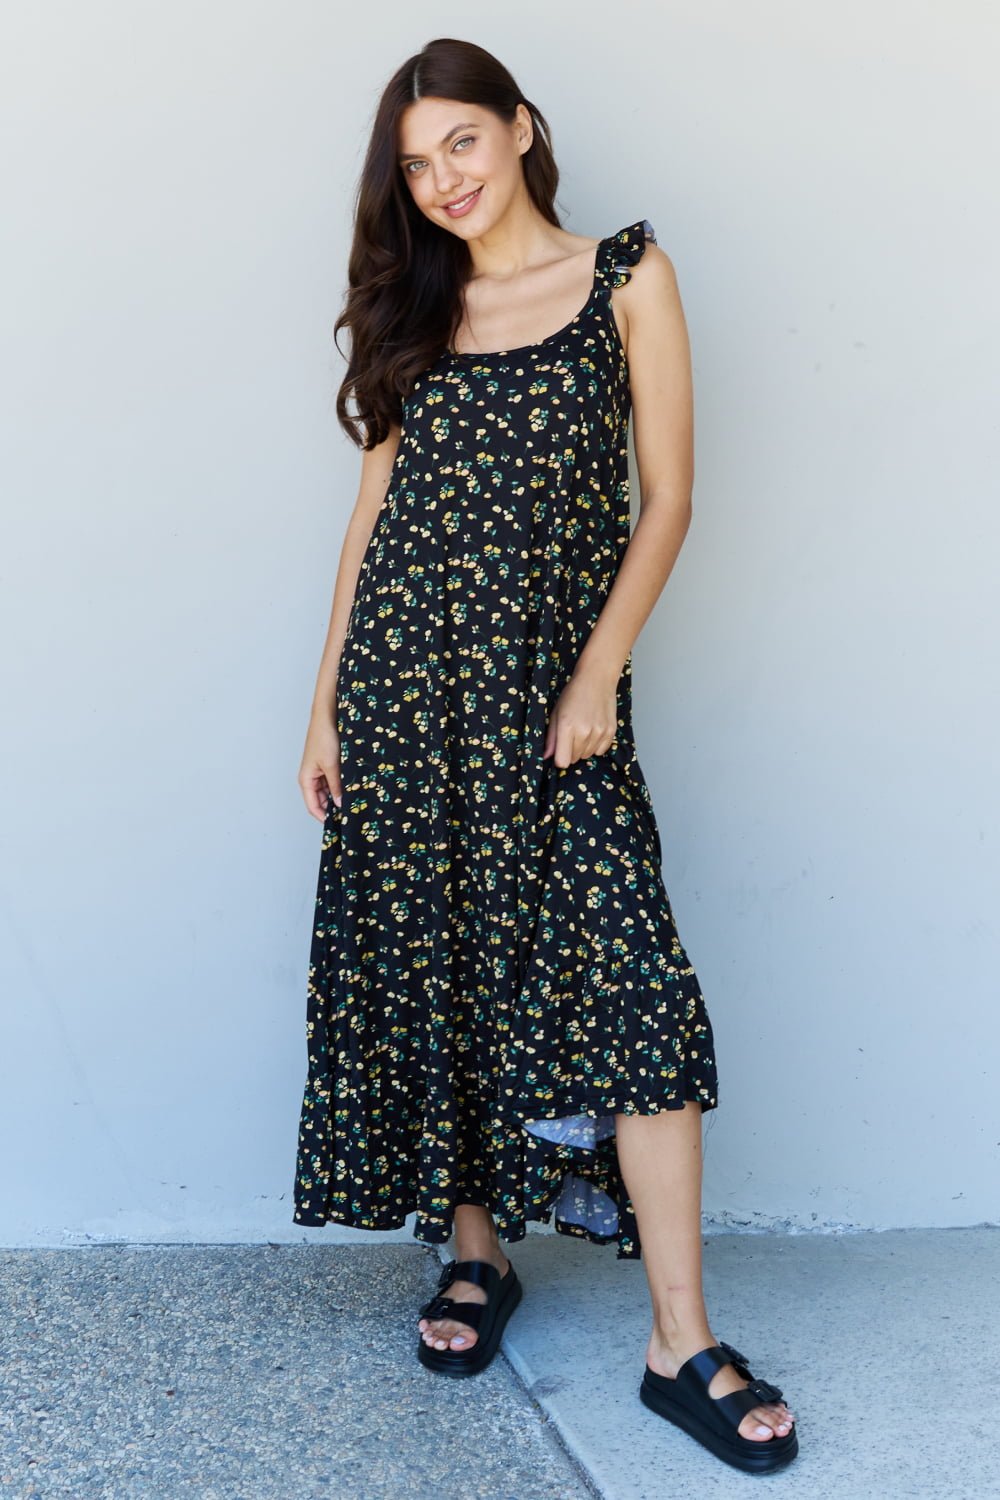 Ruffle Floral Maxi Dress in Black Yellow Floral - Muses Of Bohemia